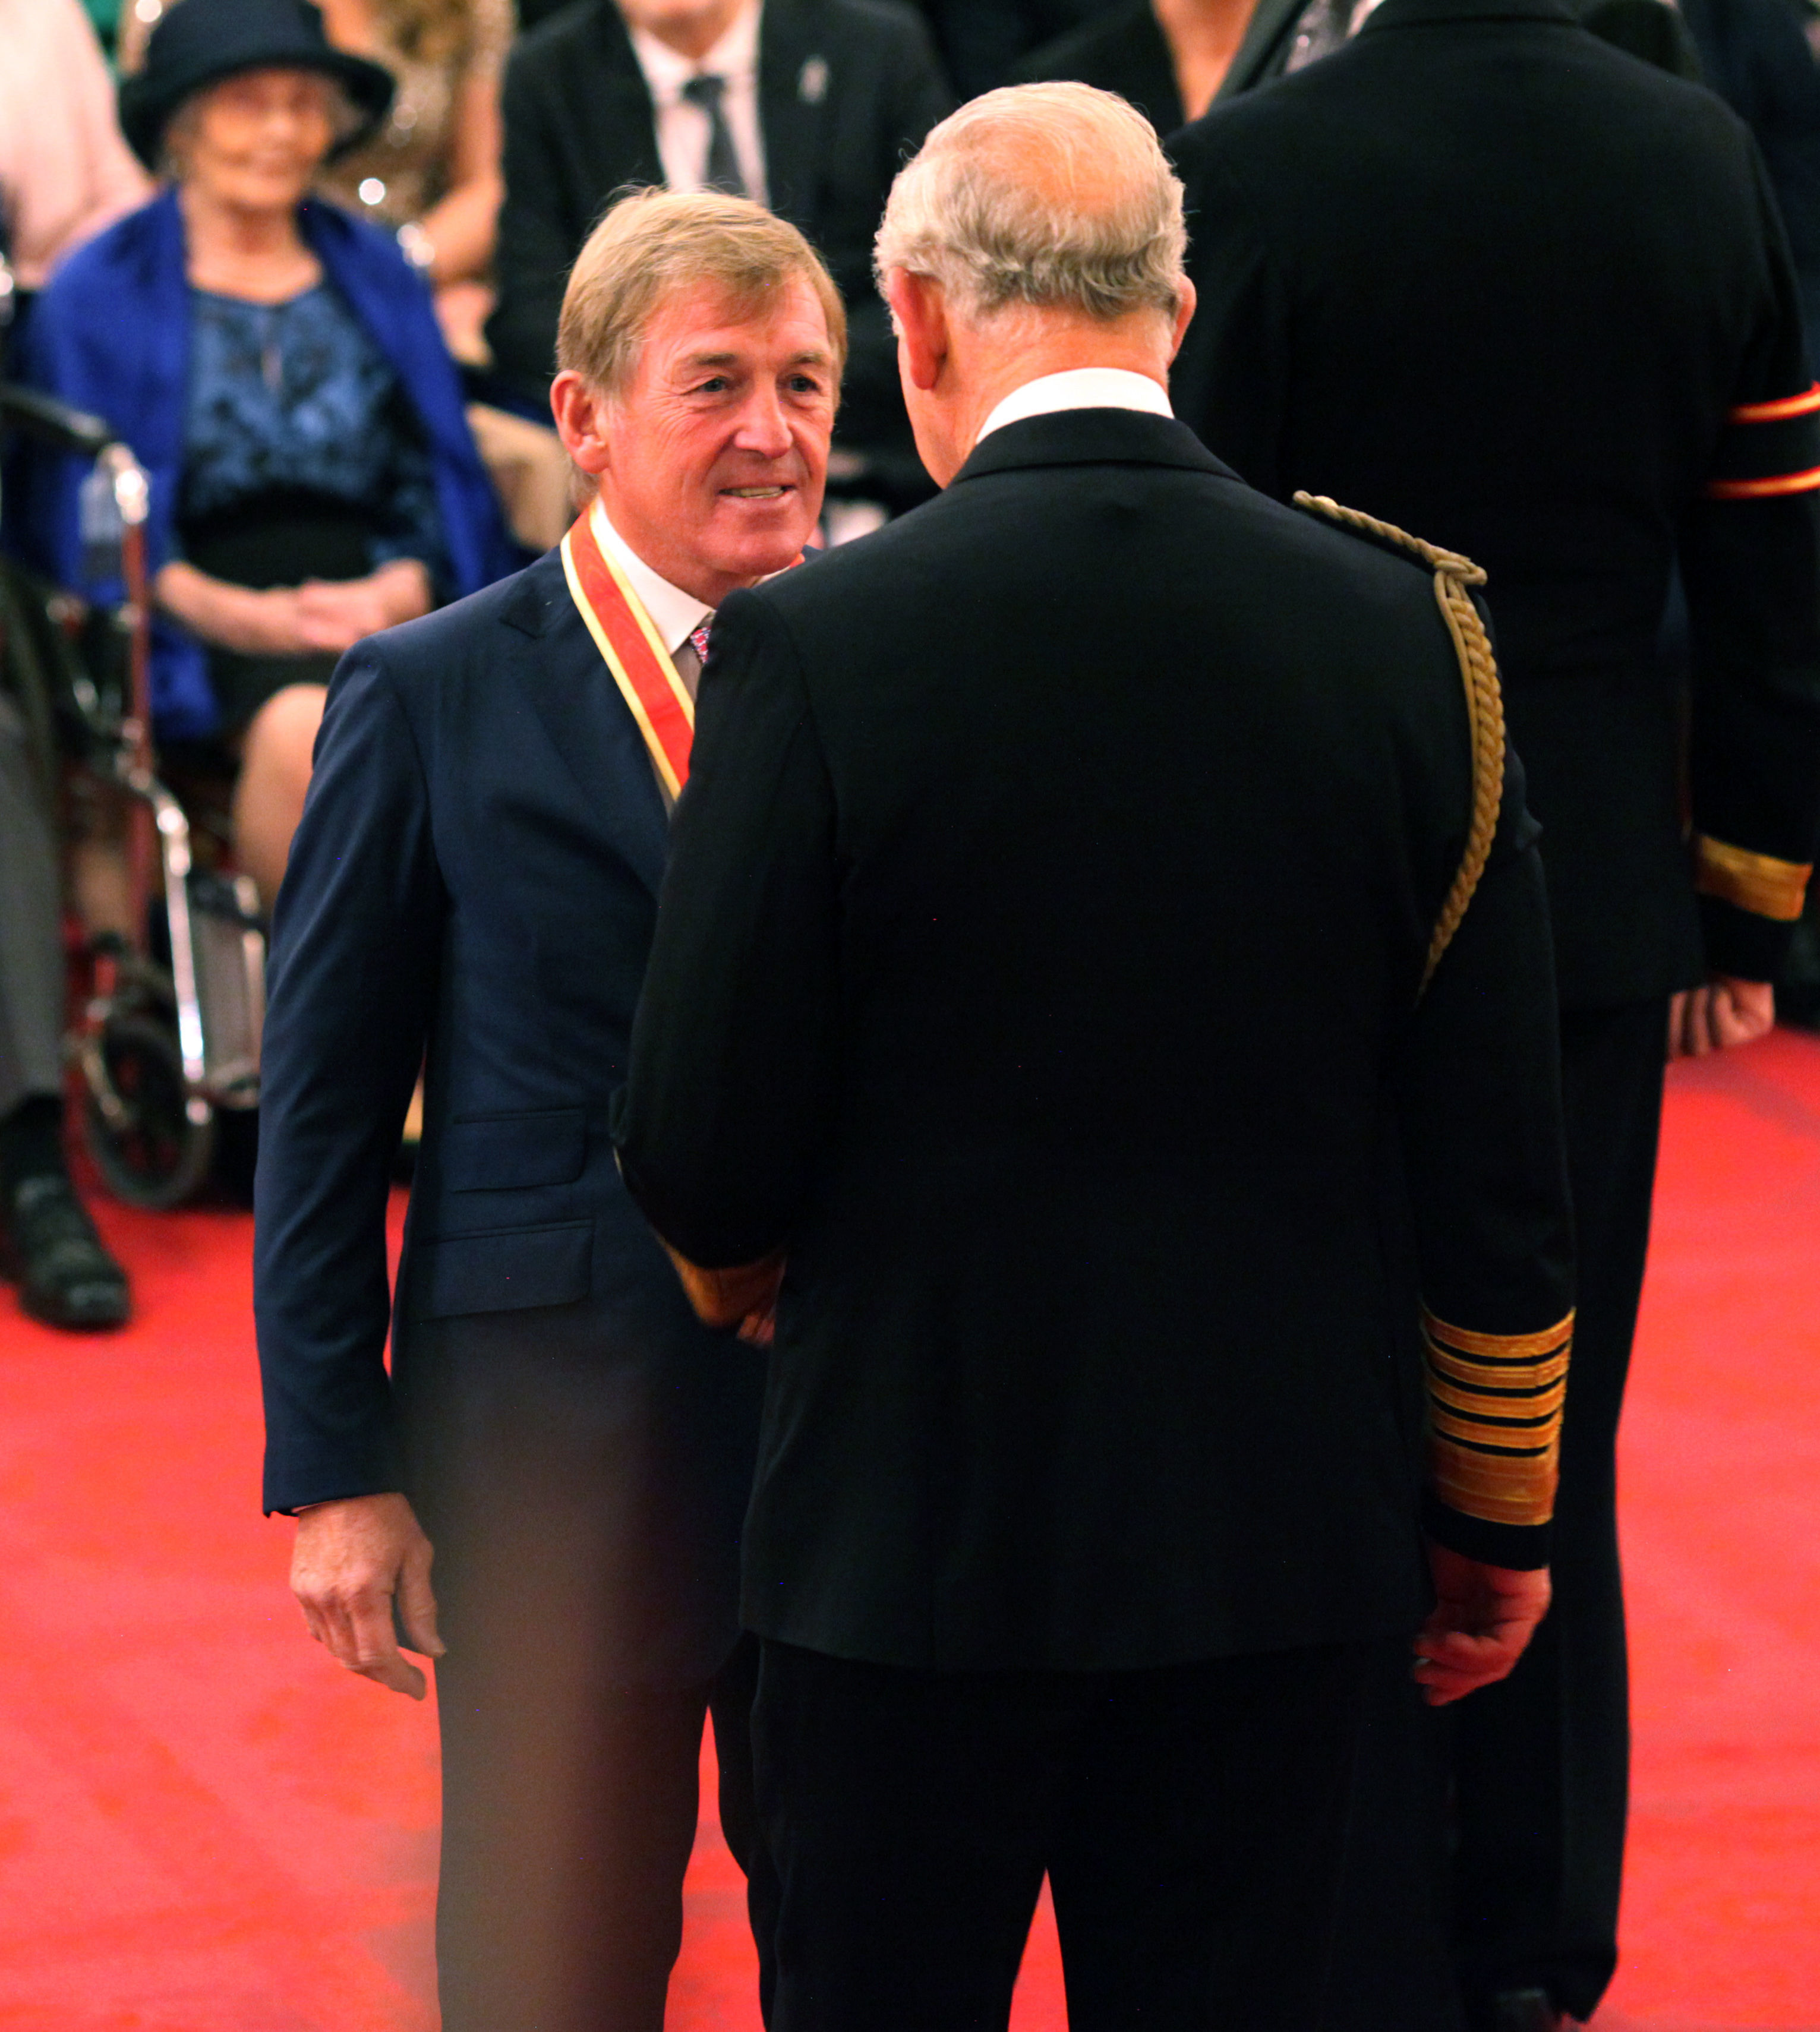 Liverpool legend Sir Kenny Dalglish is knighted by the Prince of Wales at Buckingham Palace. PRESS ASSOCIATION Photo. Picture date: Friday November 16, 2018. See PA story ROYAL Investiture. Photo credit should read: Yui Mok/PA Wire